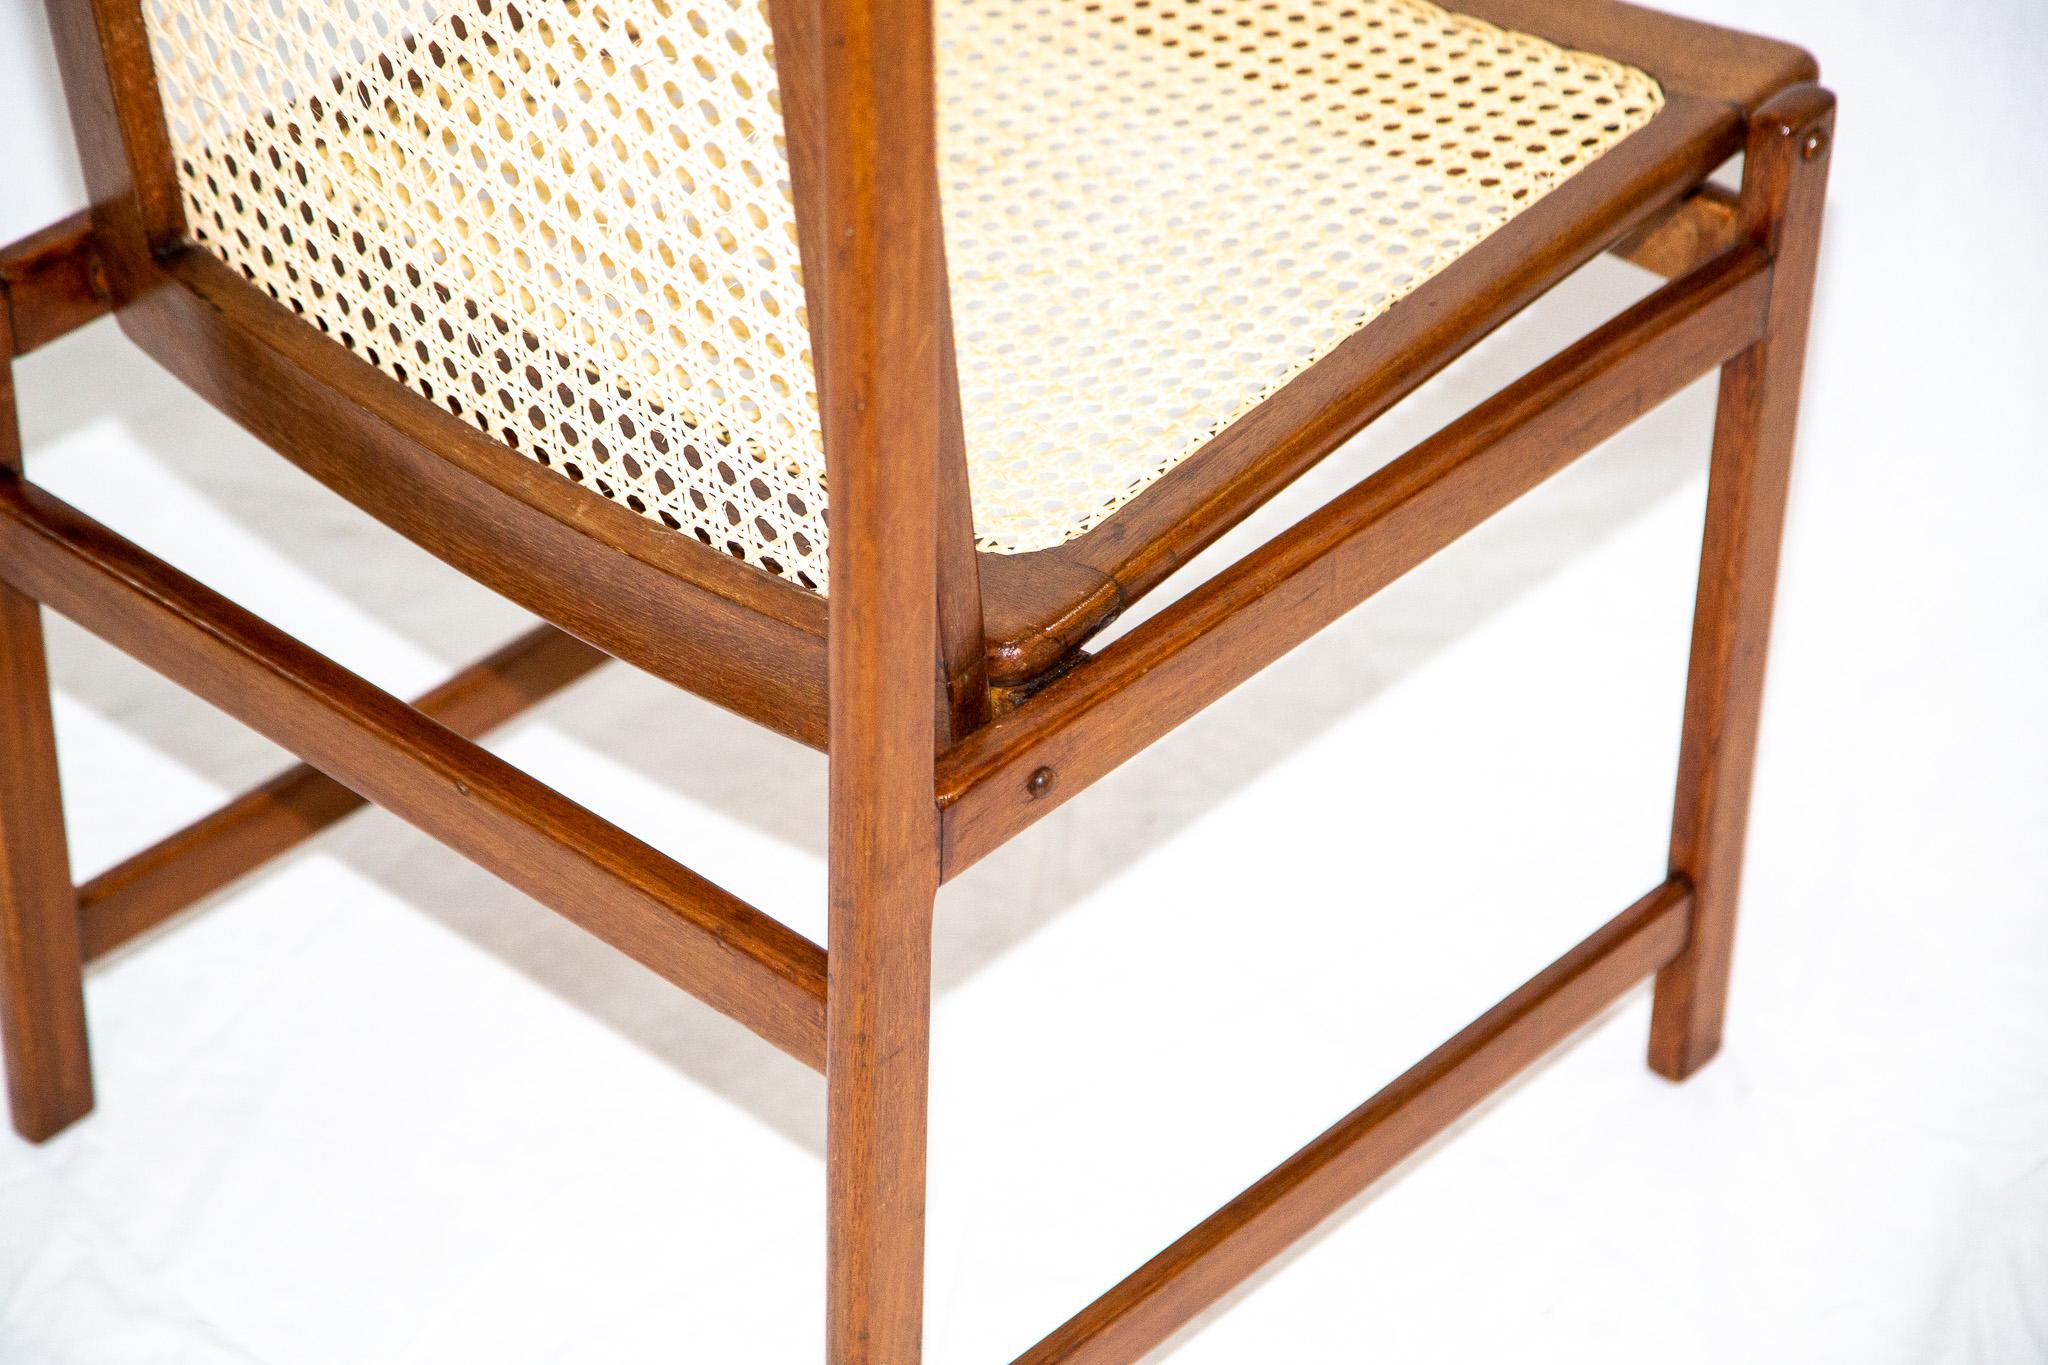 Mid-Century Modern Dining Chair Set in Hardwood & Caning, Celina, Brazil, 1960s For Sale 3